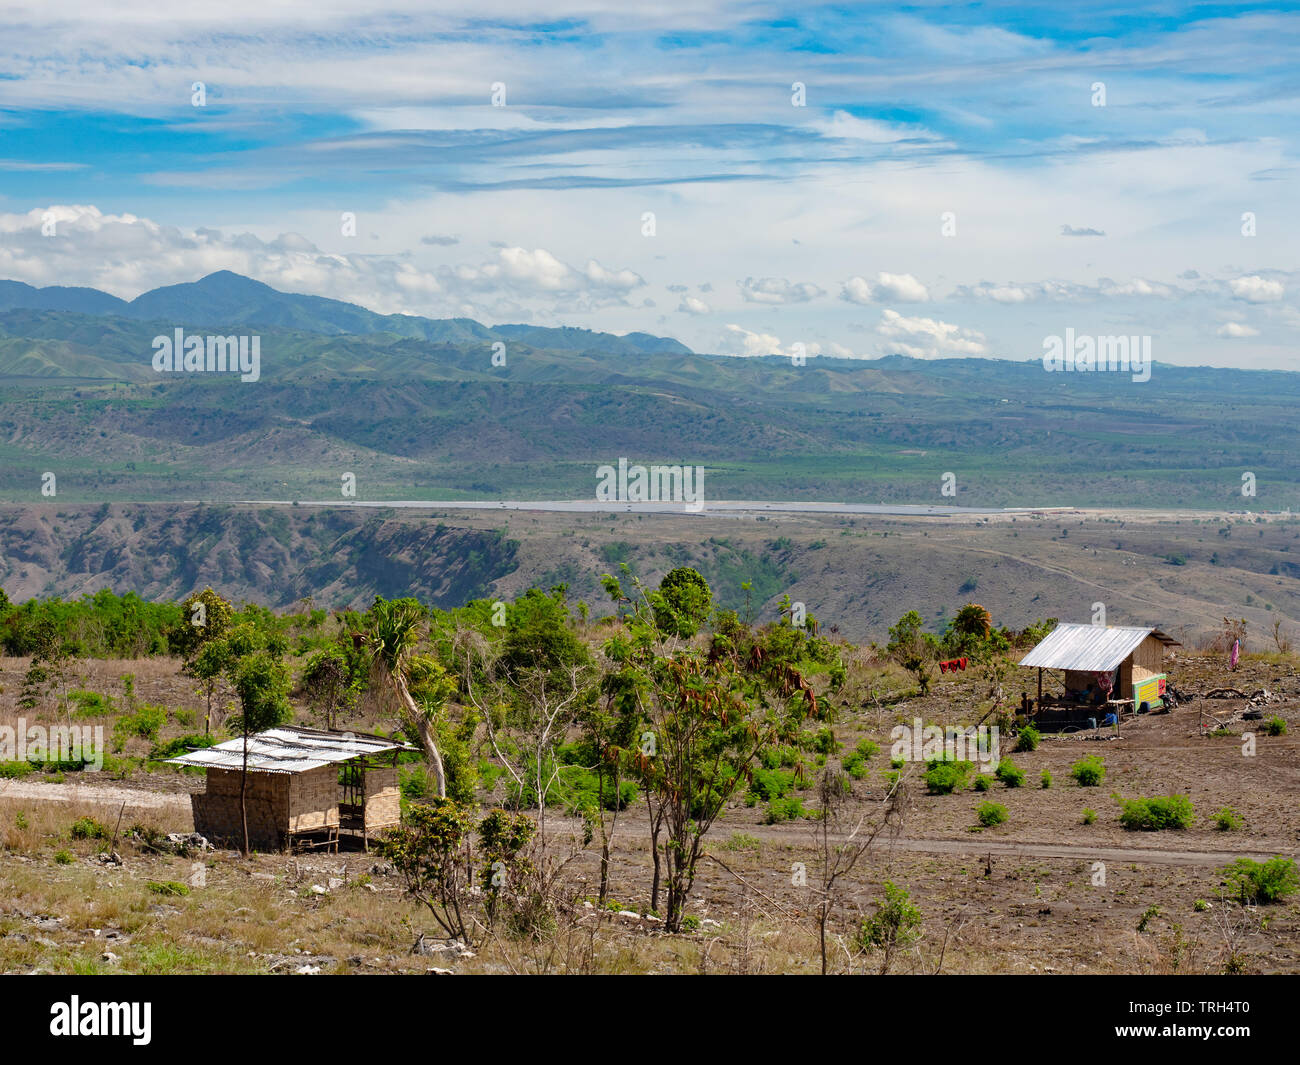 View of the dry mountain landscape in Barangay Bawing, General Santos City, South Cotabato on Mindanao, the southernmost large island of the Philippin Stock Photo